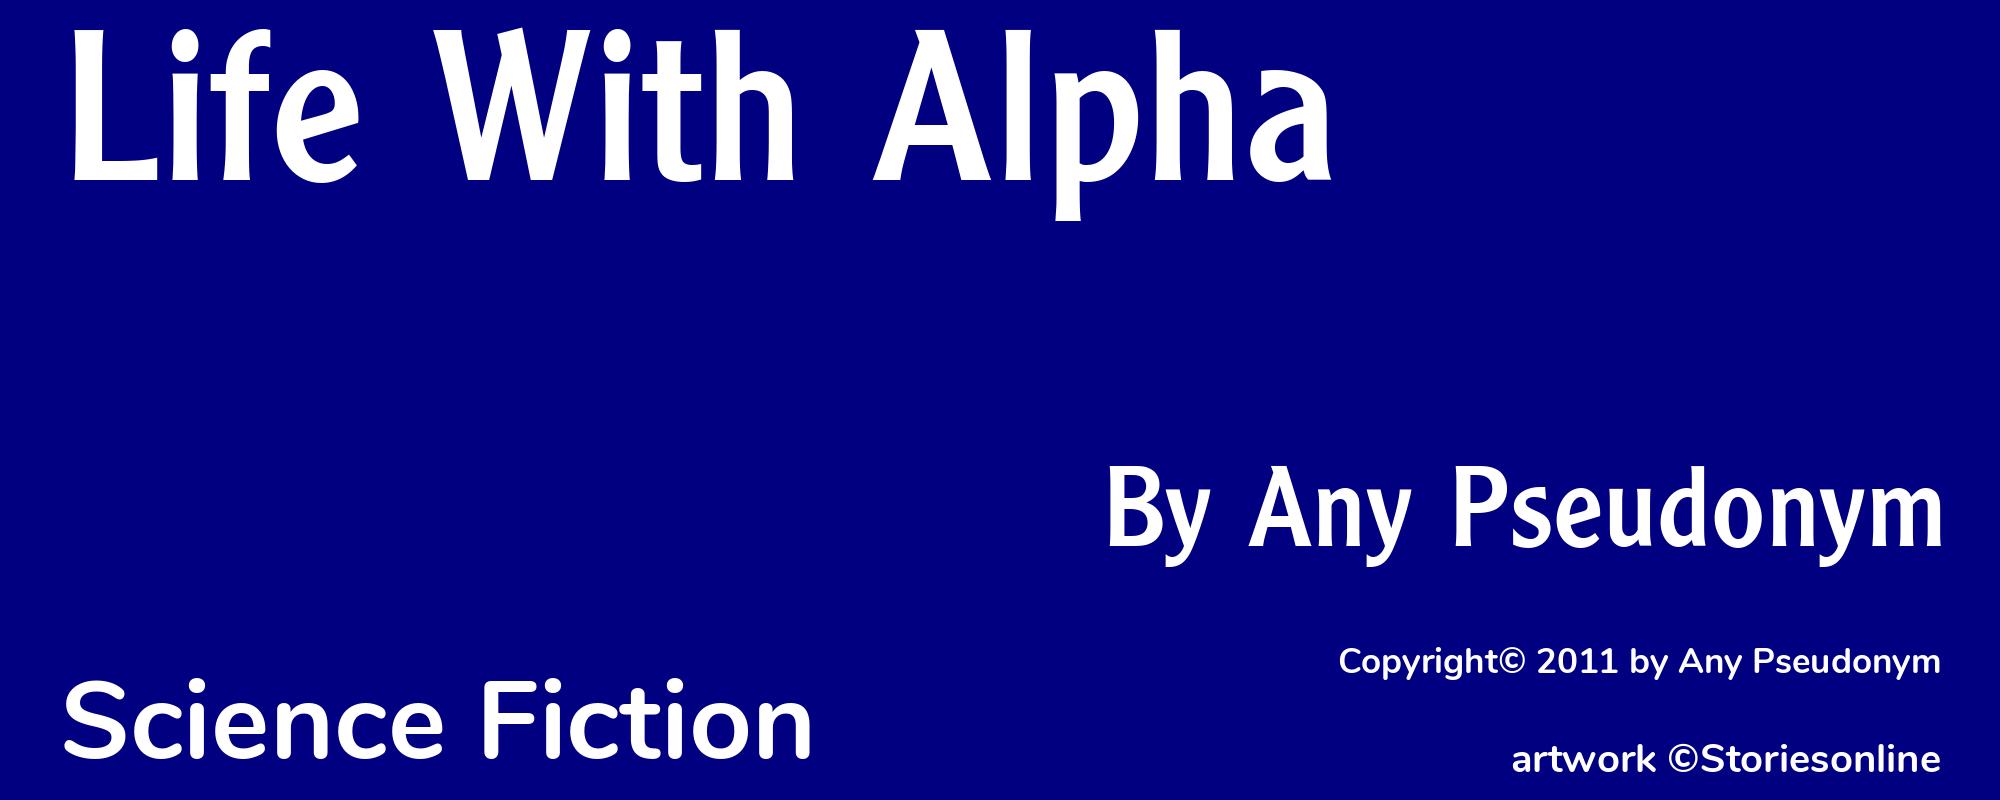 Life With Alpha - Cover